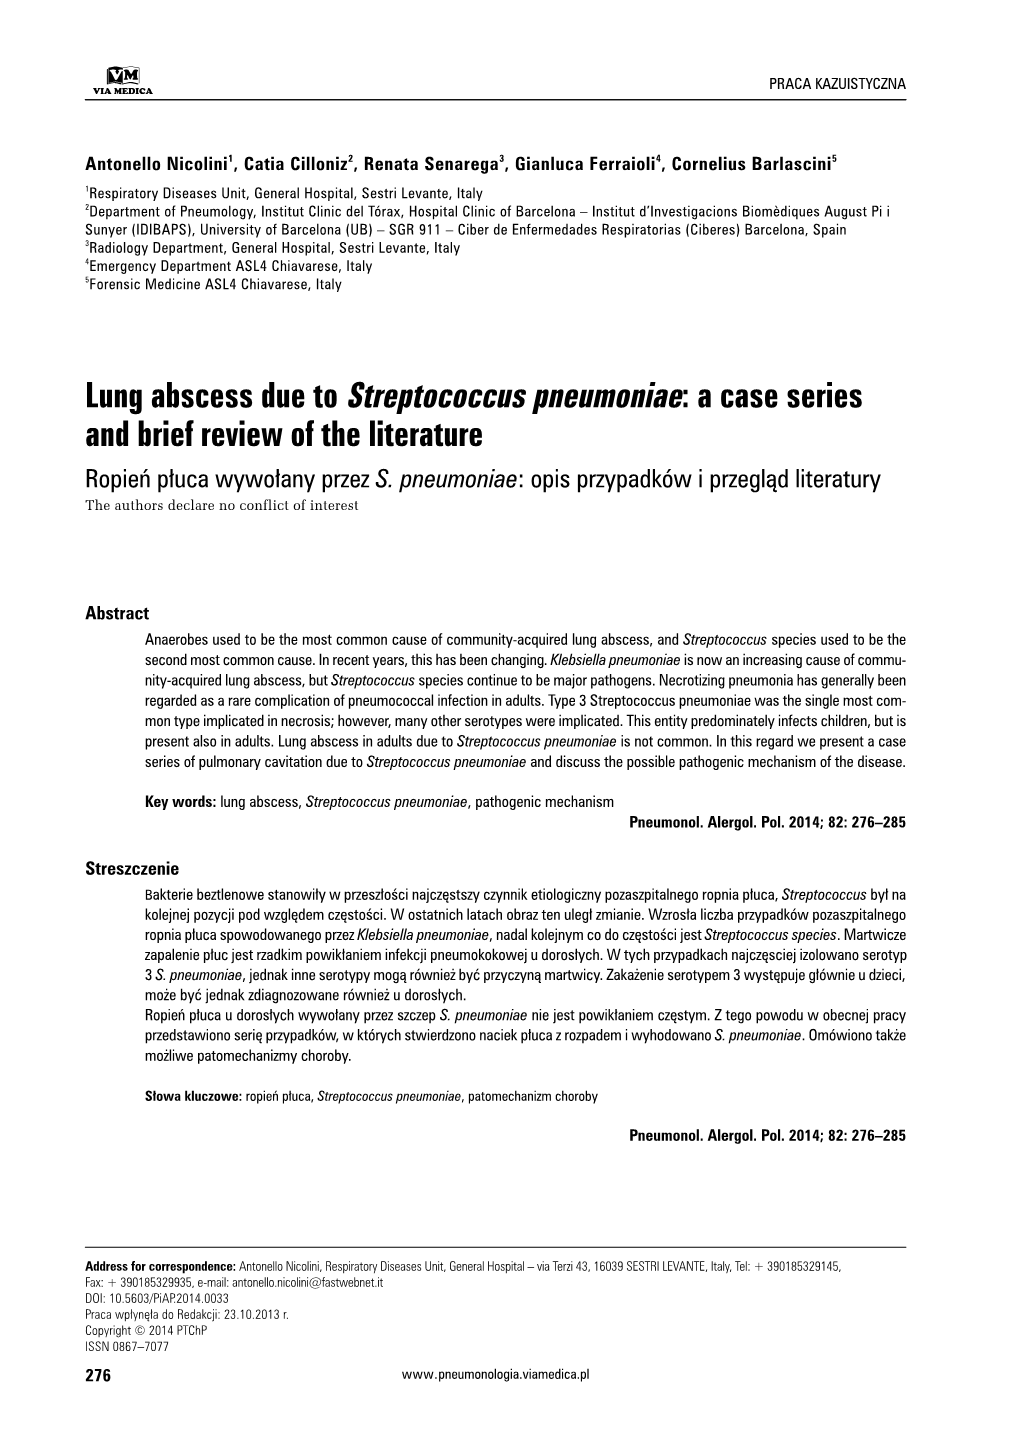 Lung Abscess Due to Streptococcus Pneumoniae: a Case Series and Brief Review of the Literature Ropień Płuca Wywołany Przez S